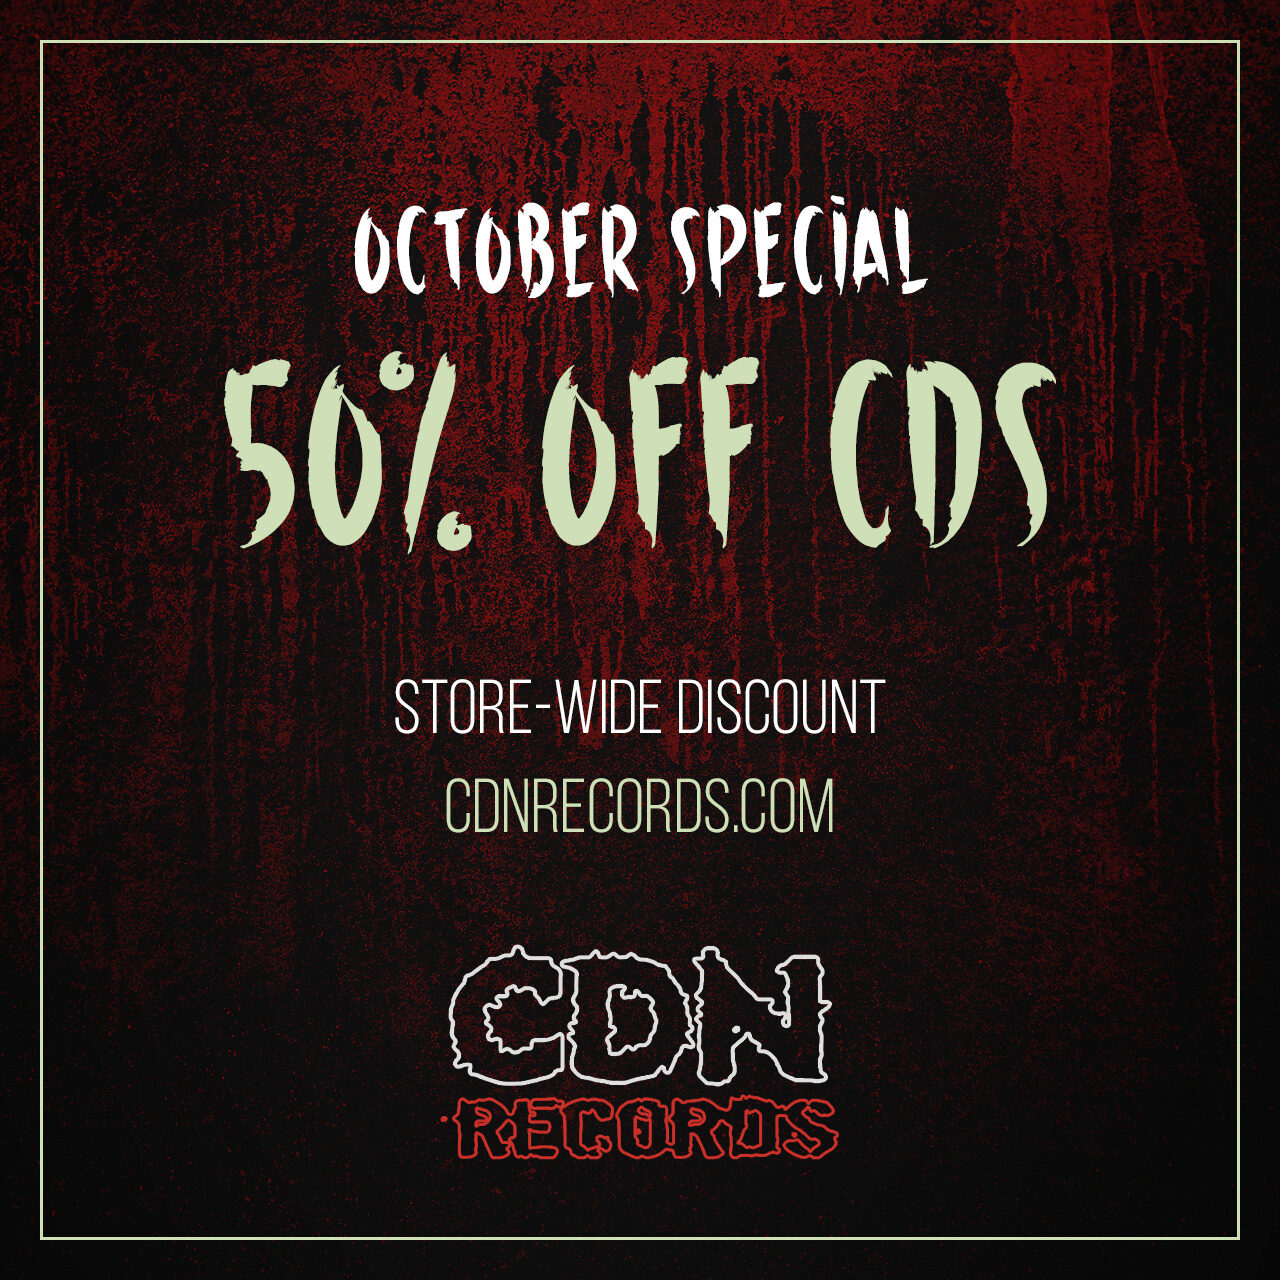 Promo graphic for store-wide 50% off CDs